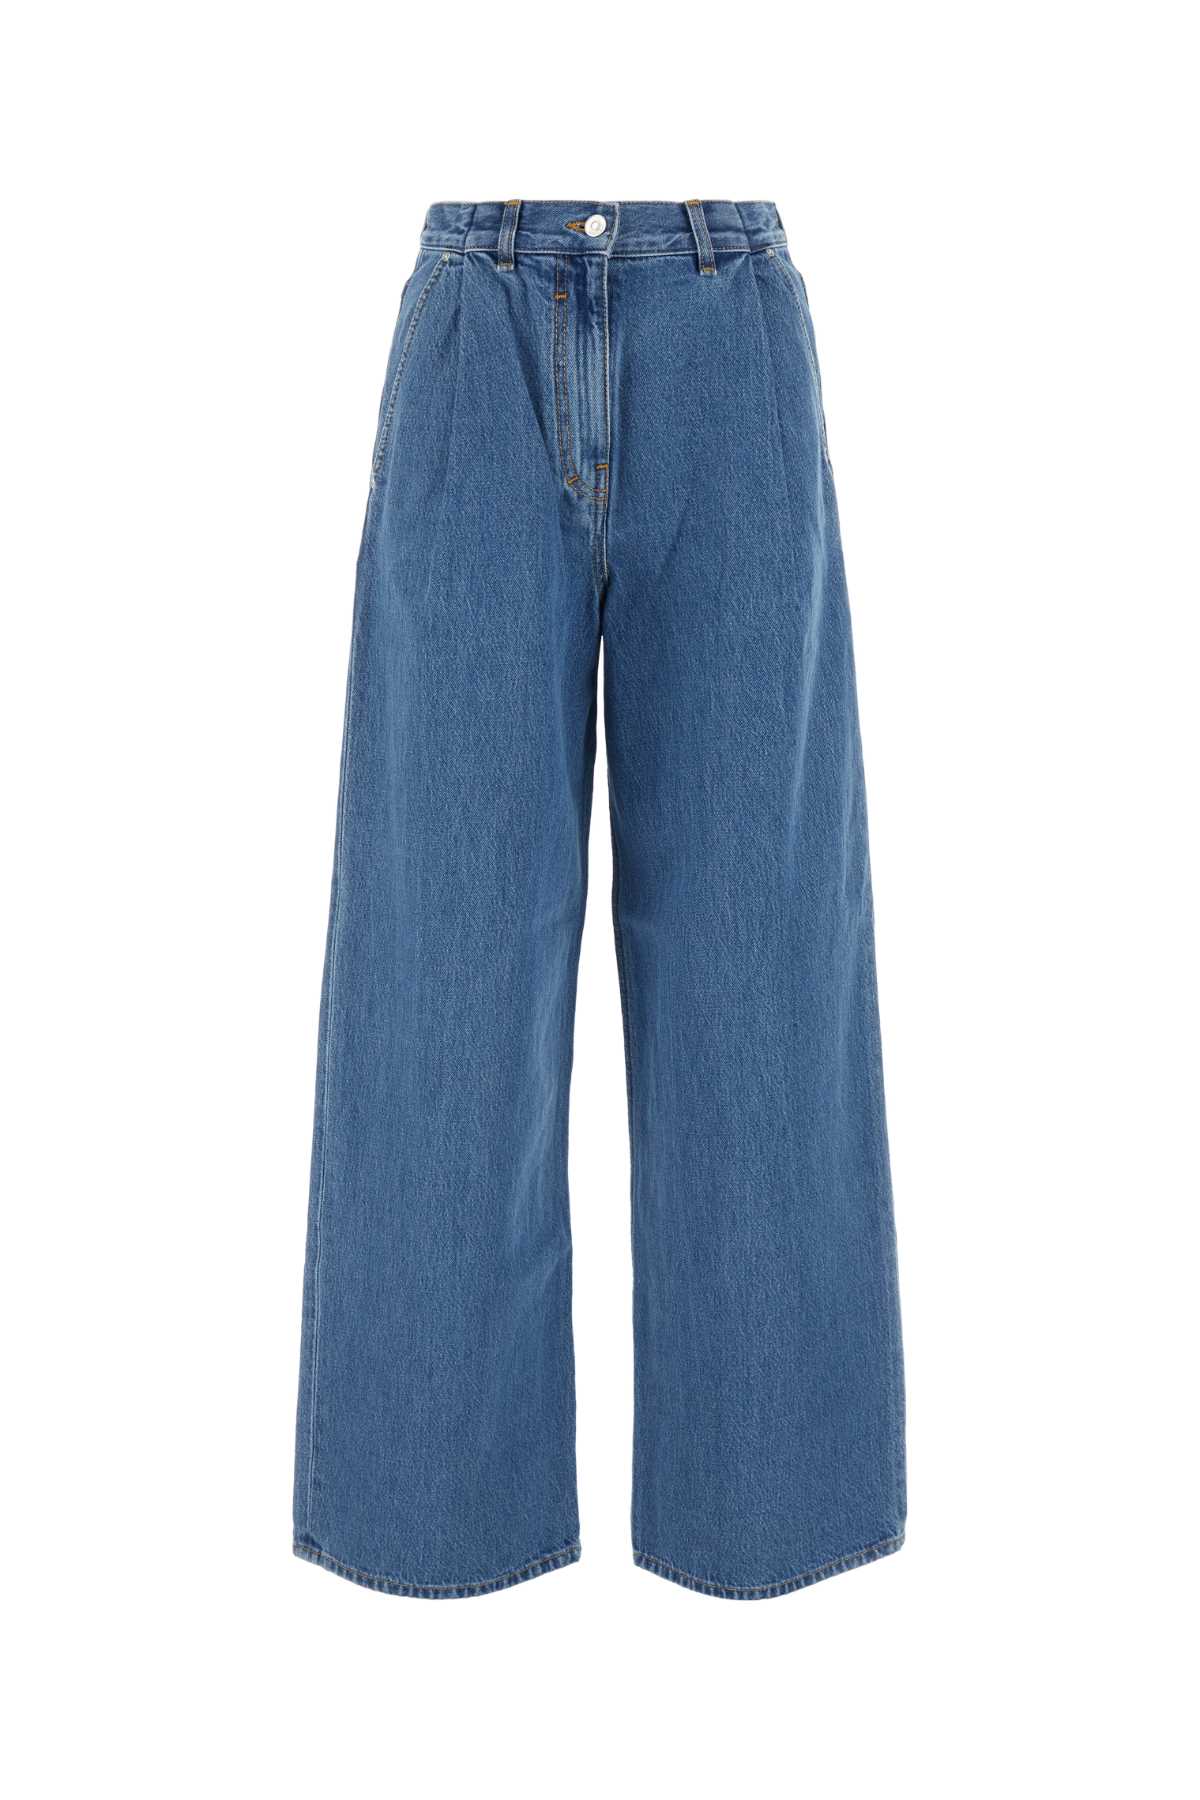 Givenchy Denim Wide-leg Jeans In Blue